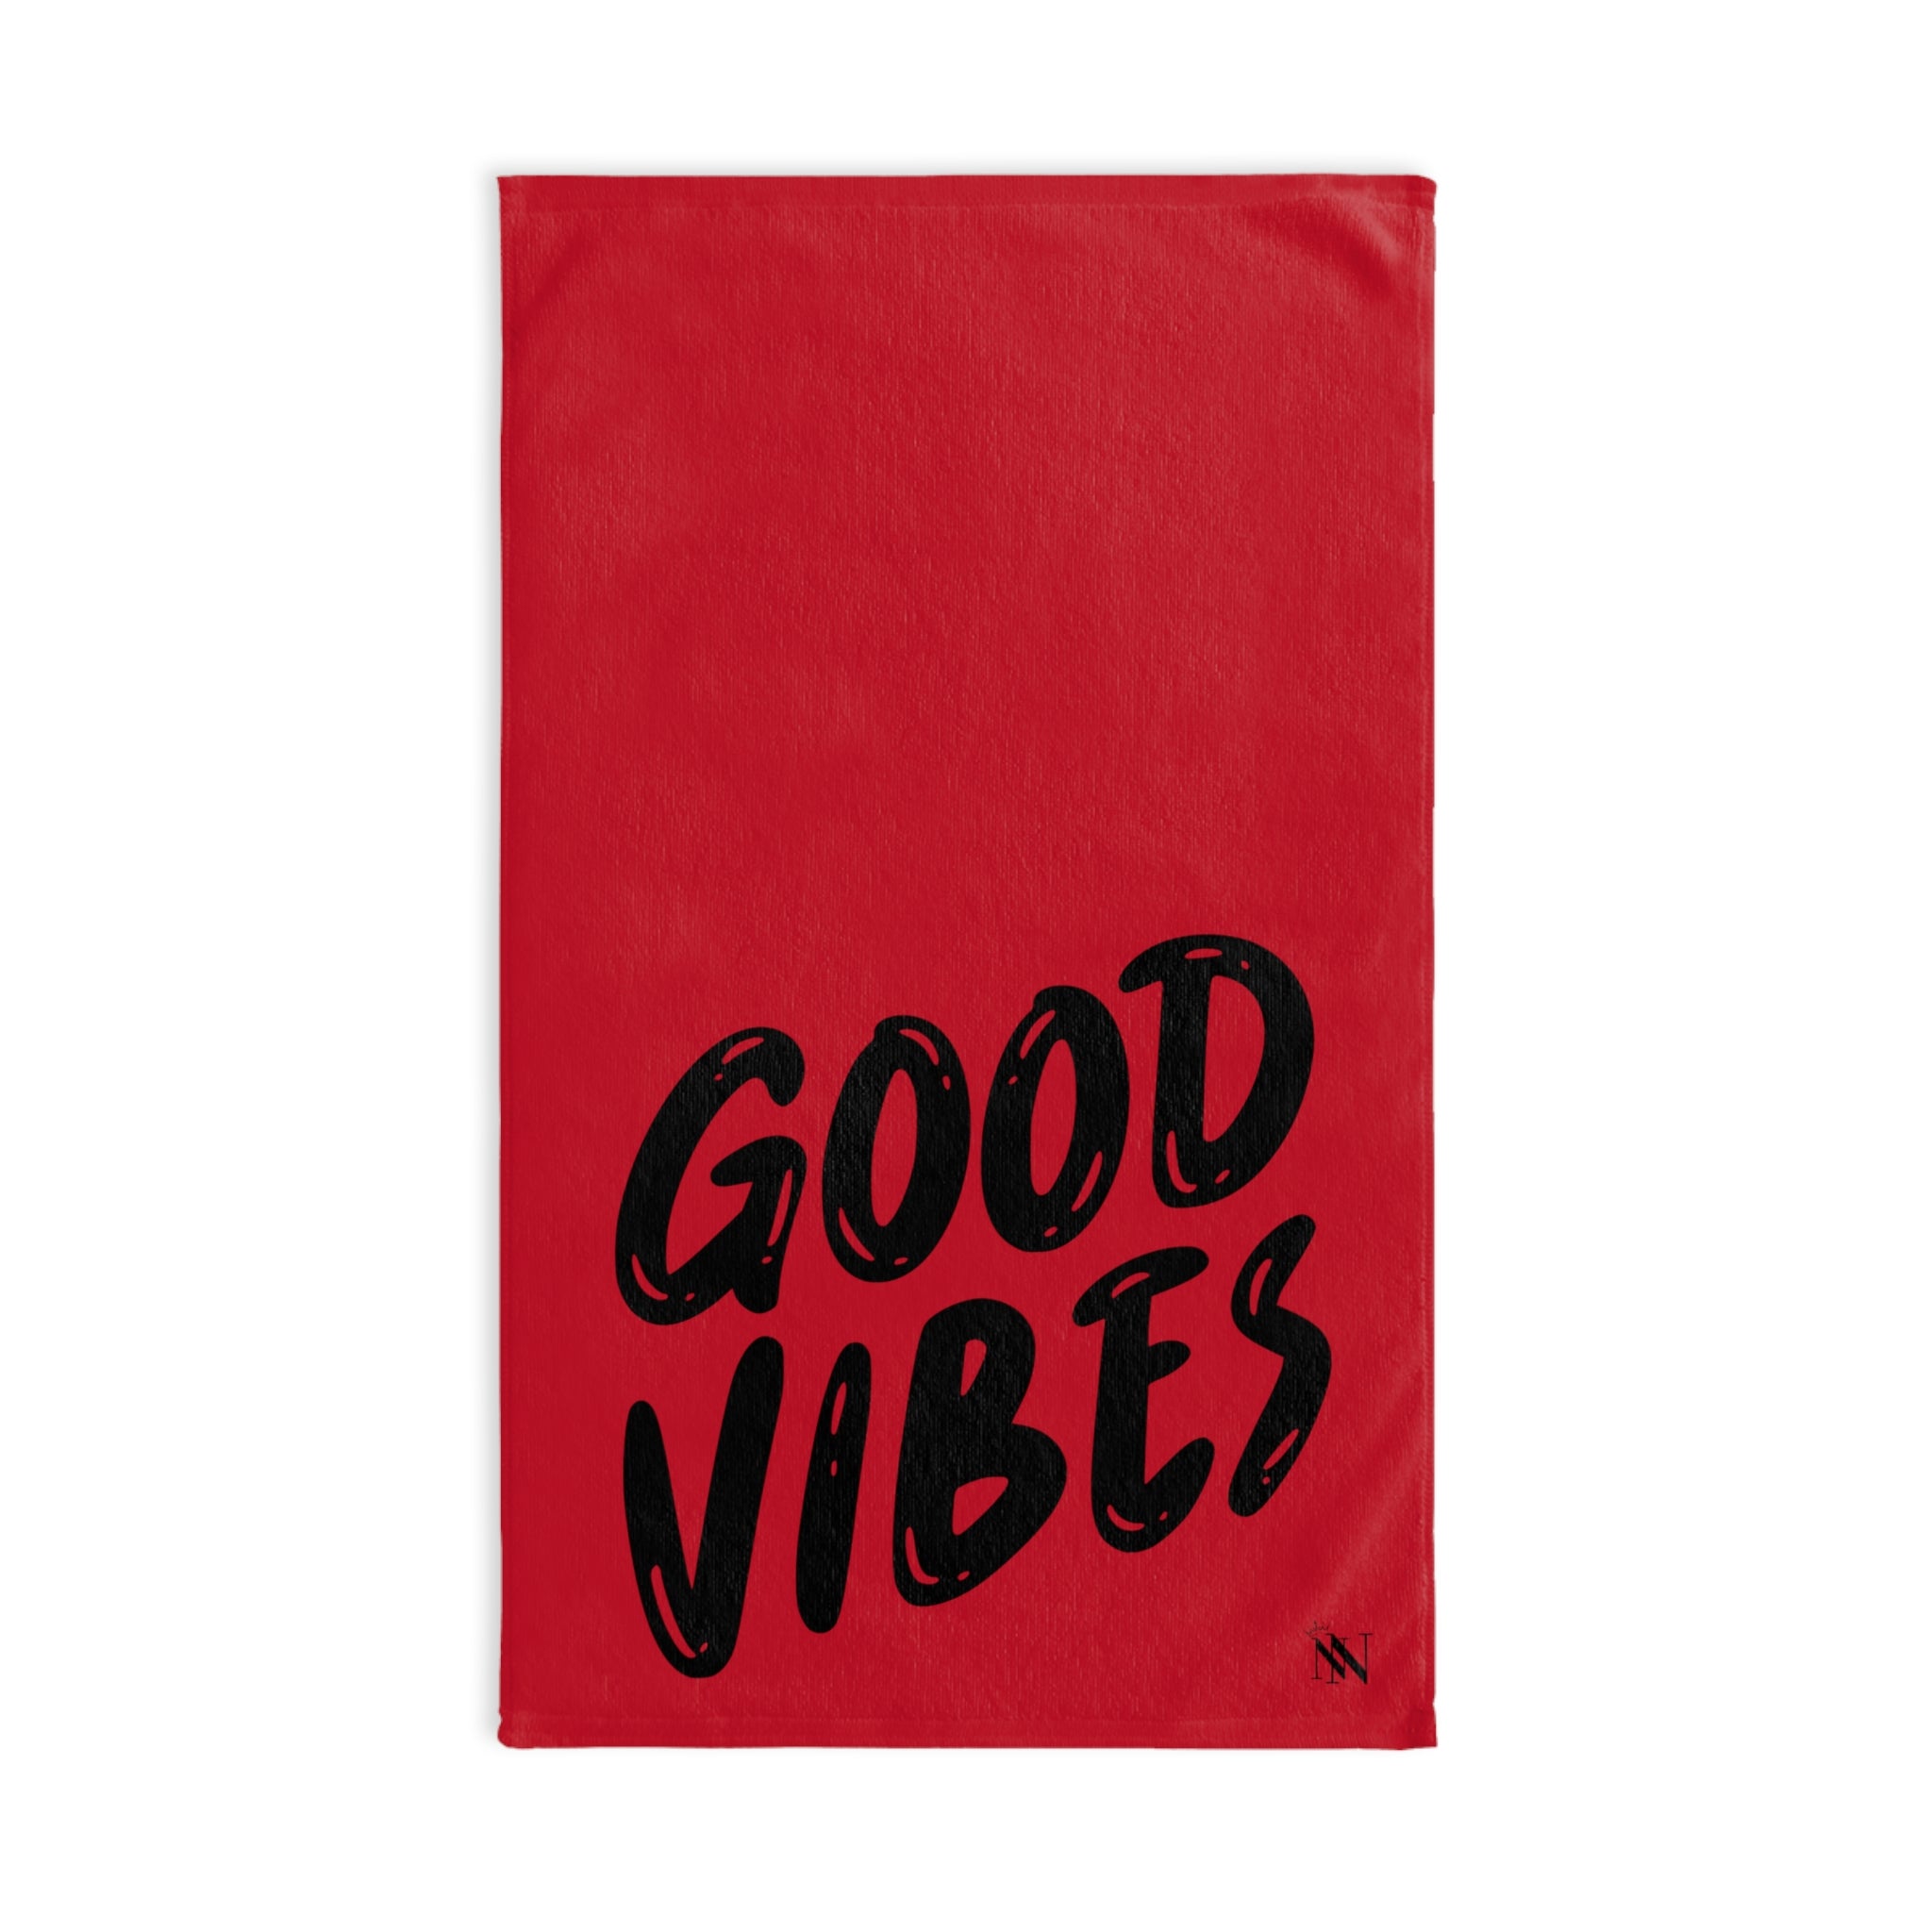 Good Vibes Bubble Red | Sexy Gifts for Boyfriend, Funny Towel Romantic Gift for Wedding Couple Fiance First Year 2nd Anniversary Valentines, Party Gag Gifts, Joke Humor Cloth for Husband Men BF NECTAR NAPKINS